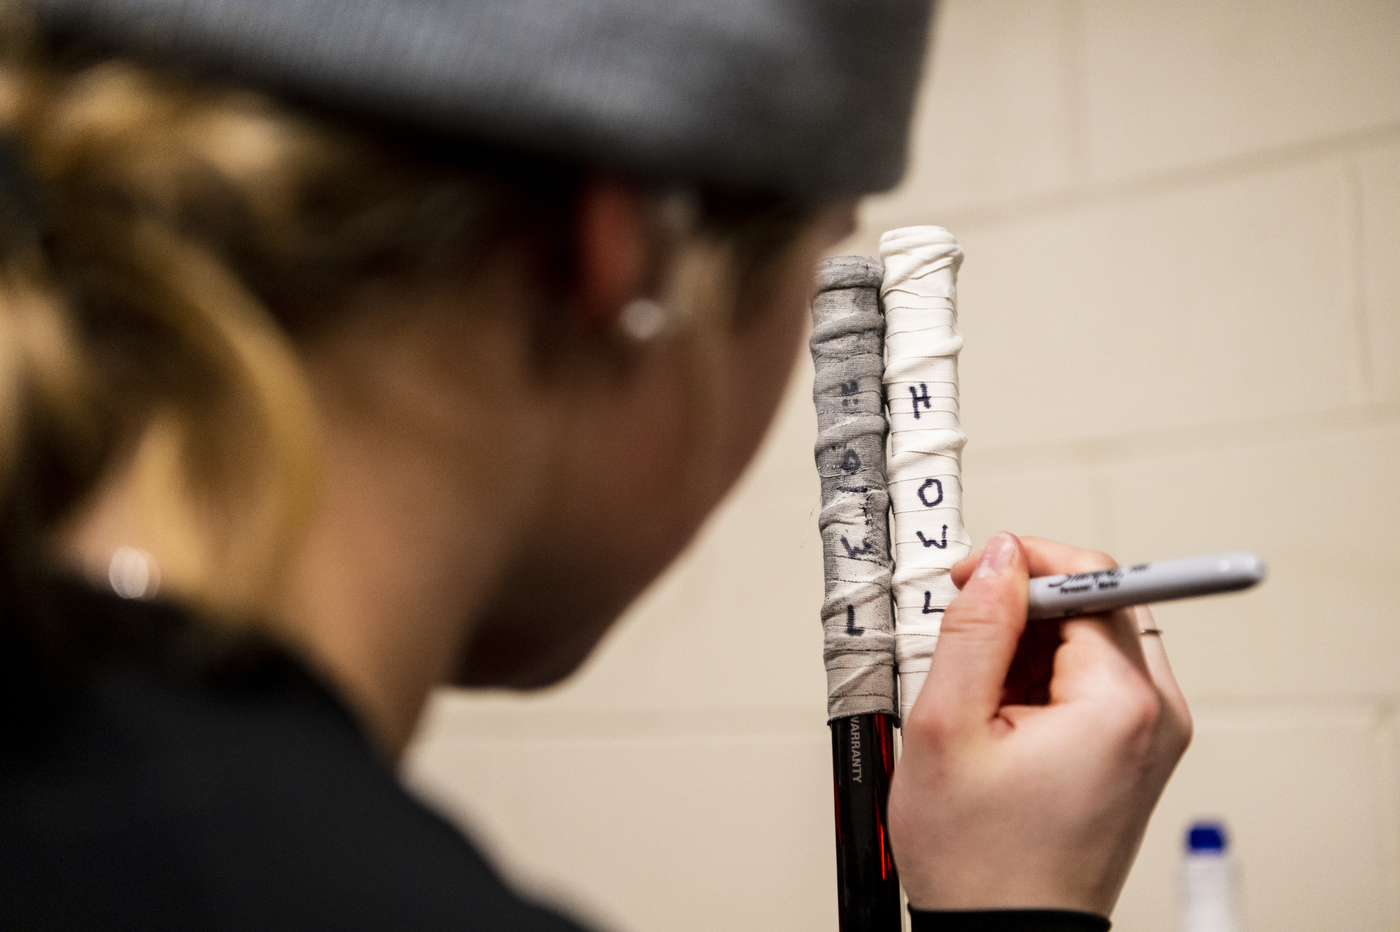 A player uses a marker to write 'howl' on tape wrapped around the top of a hockey stick